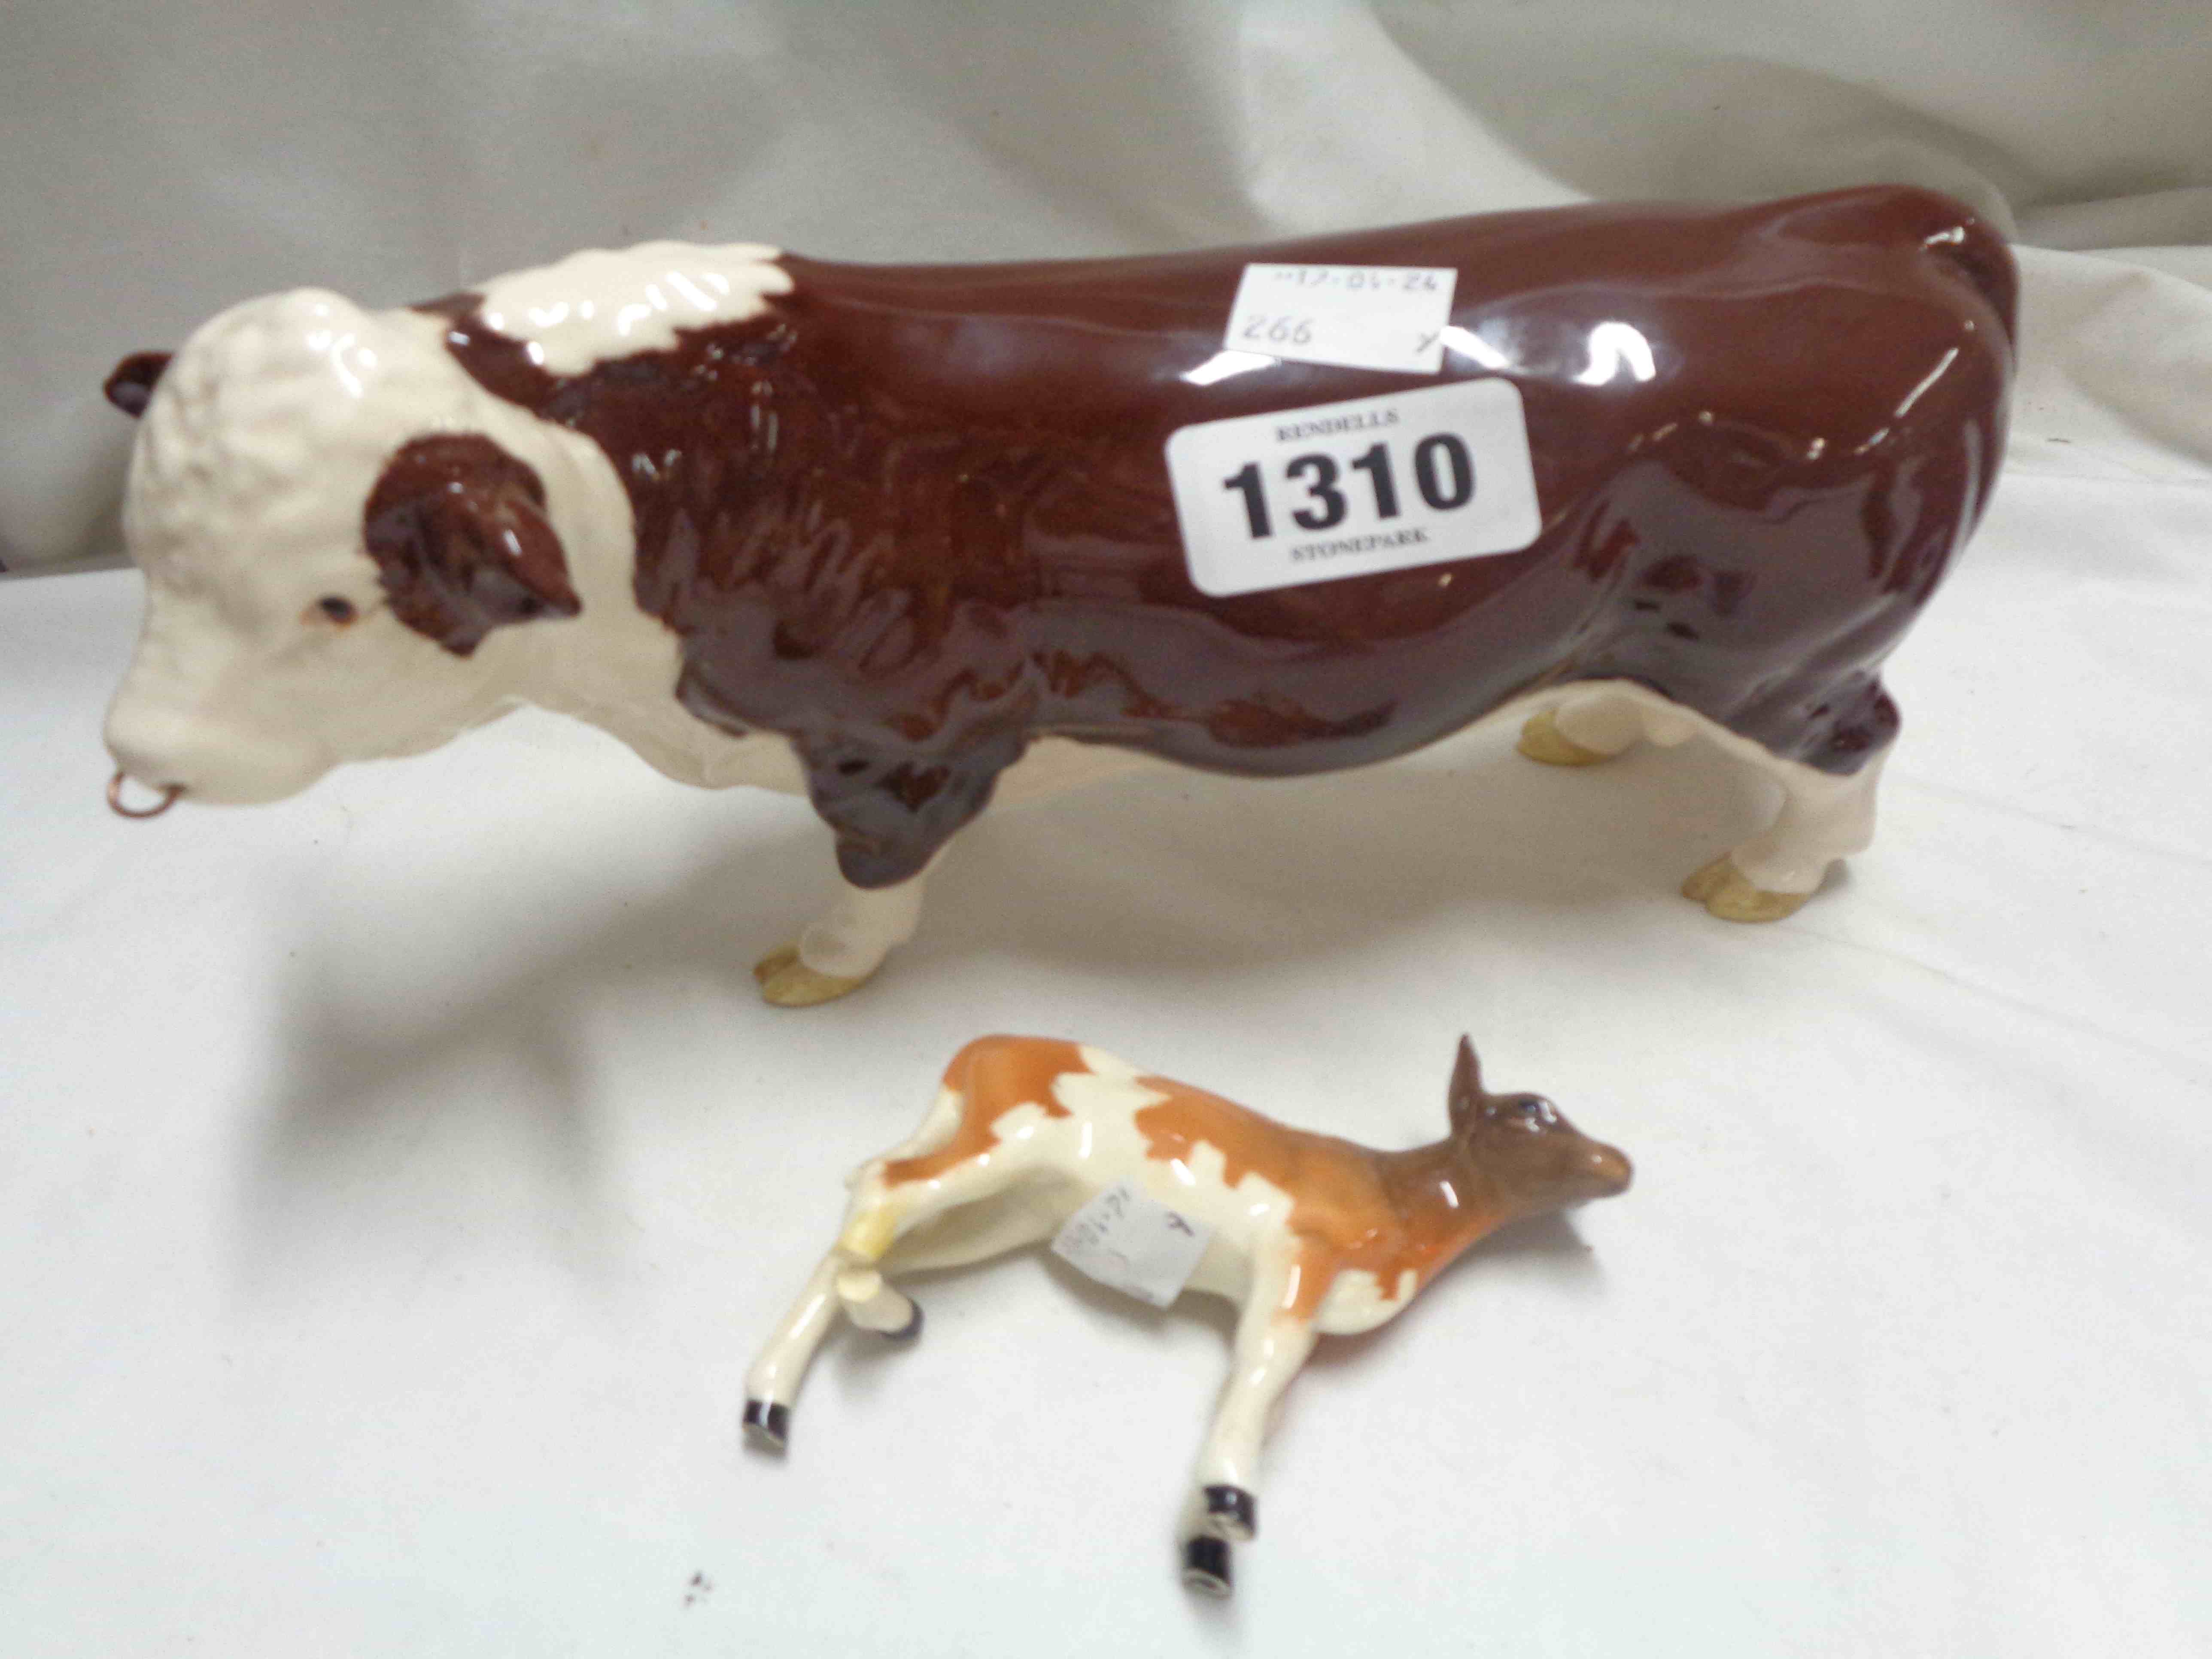 A Beswick Polled Hereford bull figurine model No. 2549A - sold with a calf model (a/f)